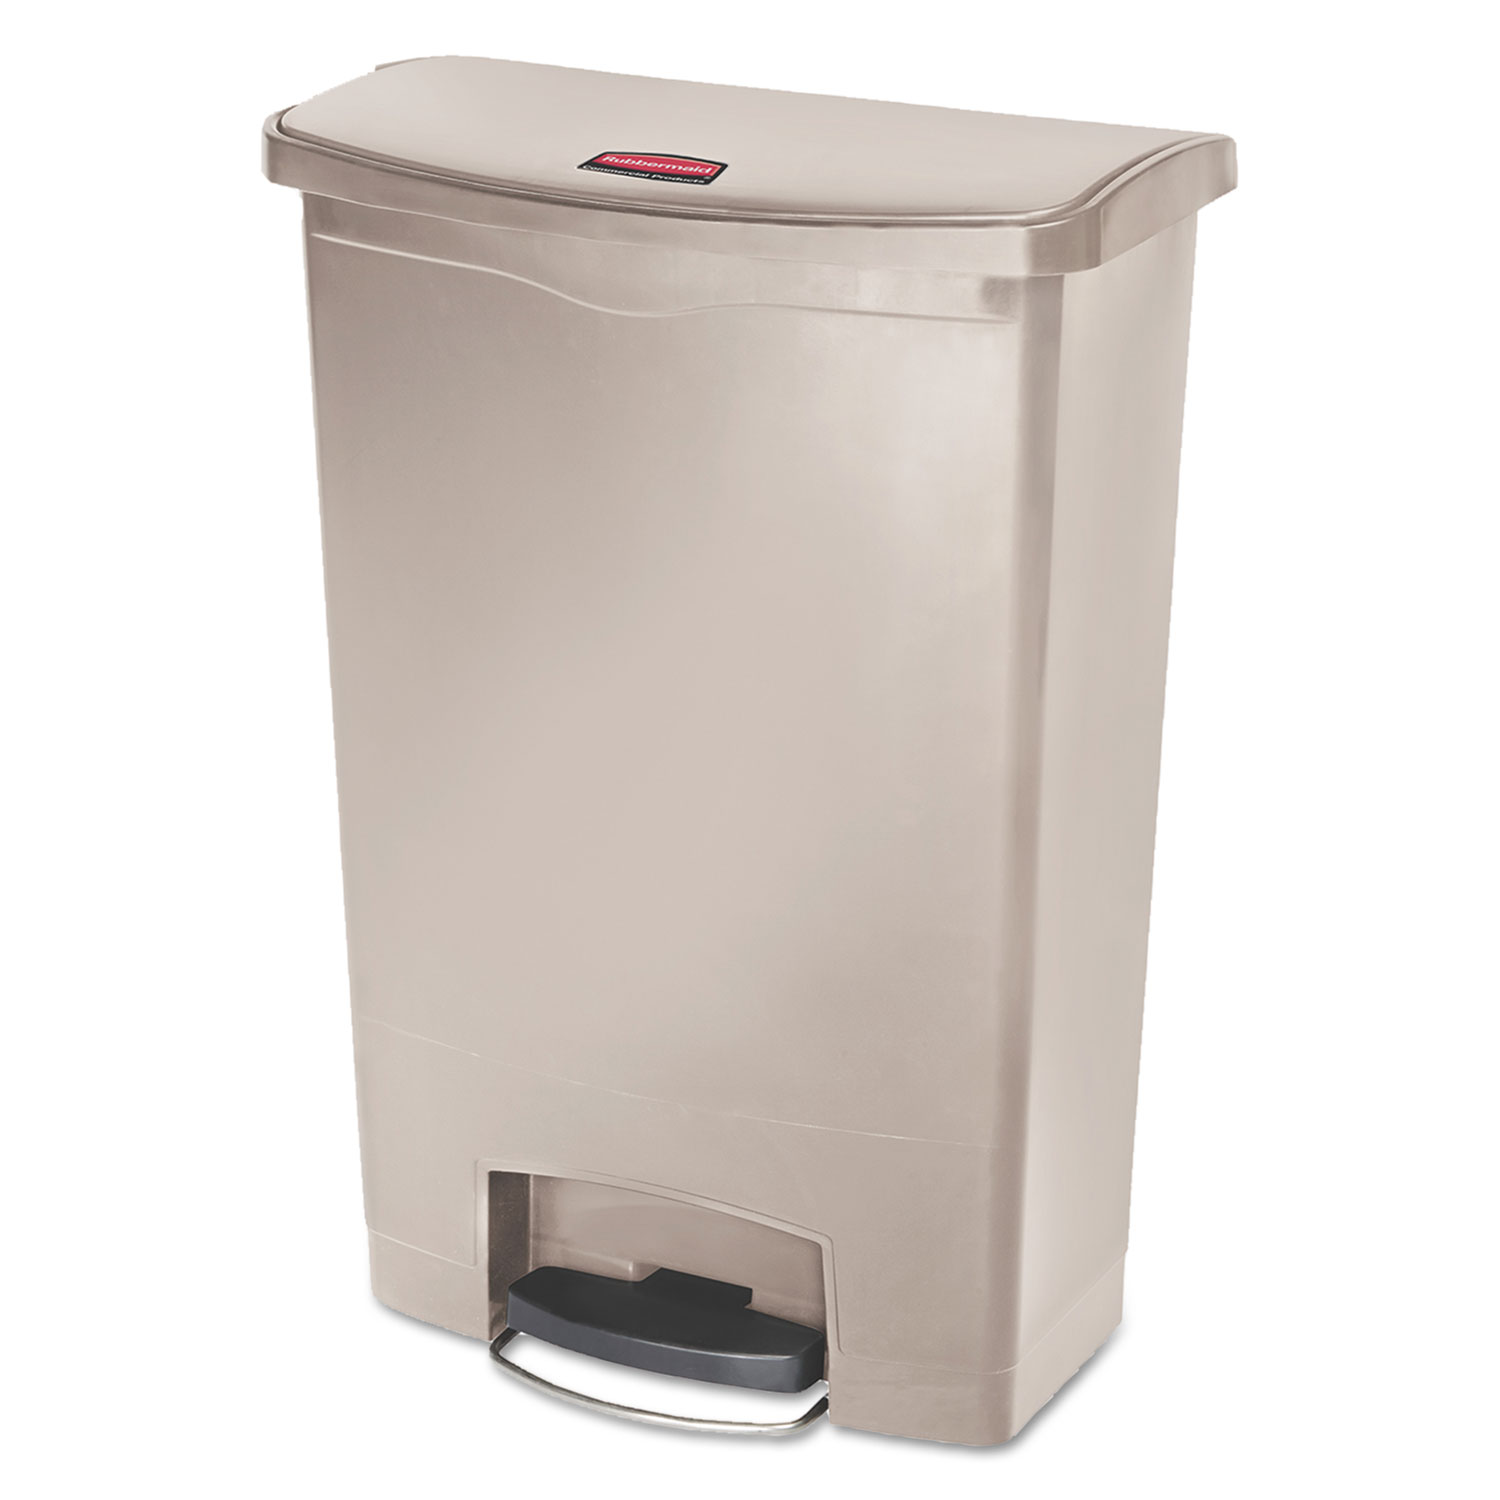  Rubbermaid Commercial 1883552 Slim Jim Resin Step-On Container, Front Step Style, 24 gal, Beige (RCP1883552) 